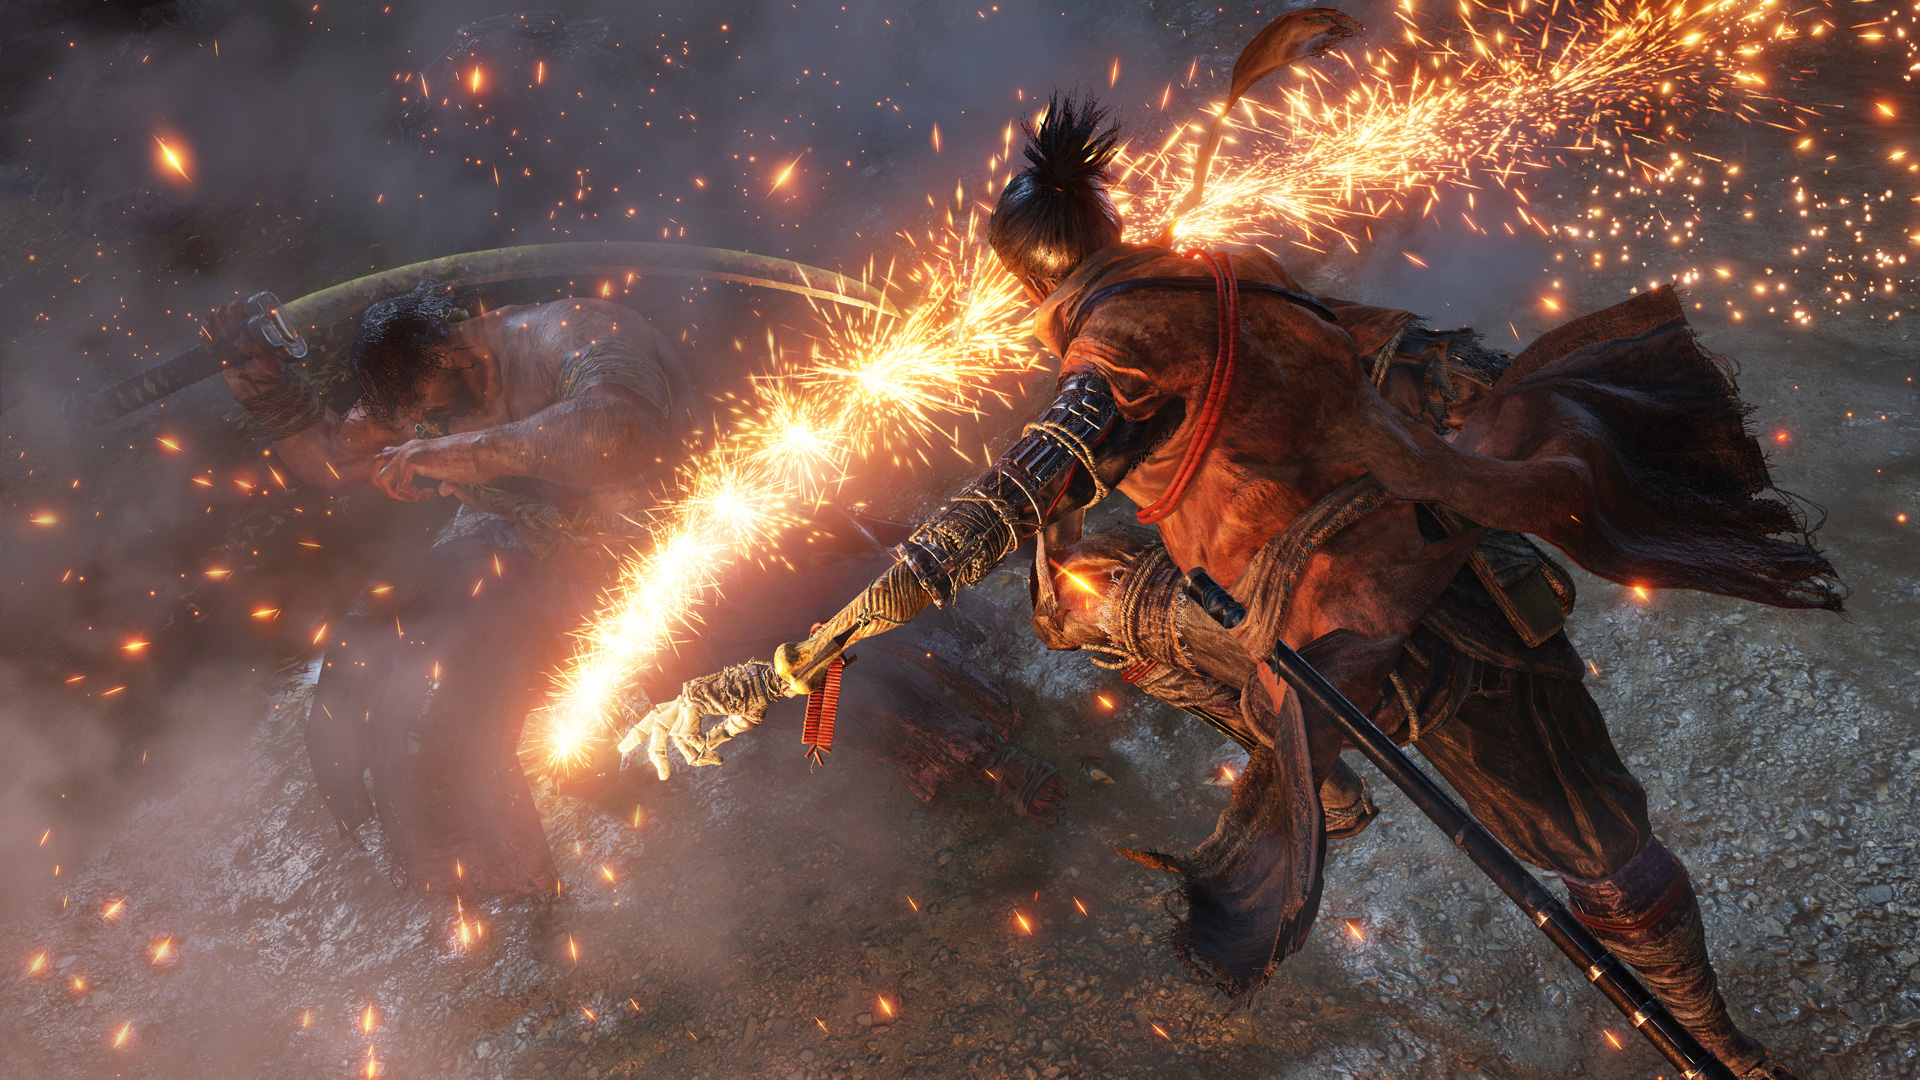 Does Sekiro have New Game Plus? PS4 and PS5 Post-Game Guide